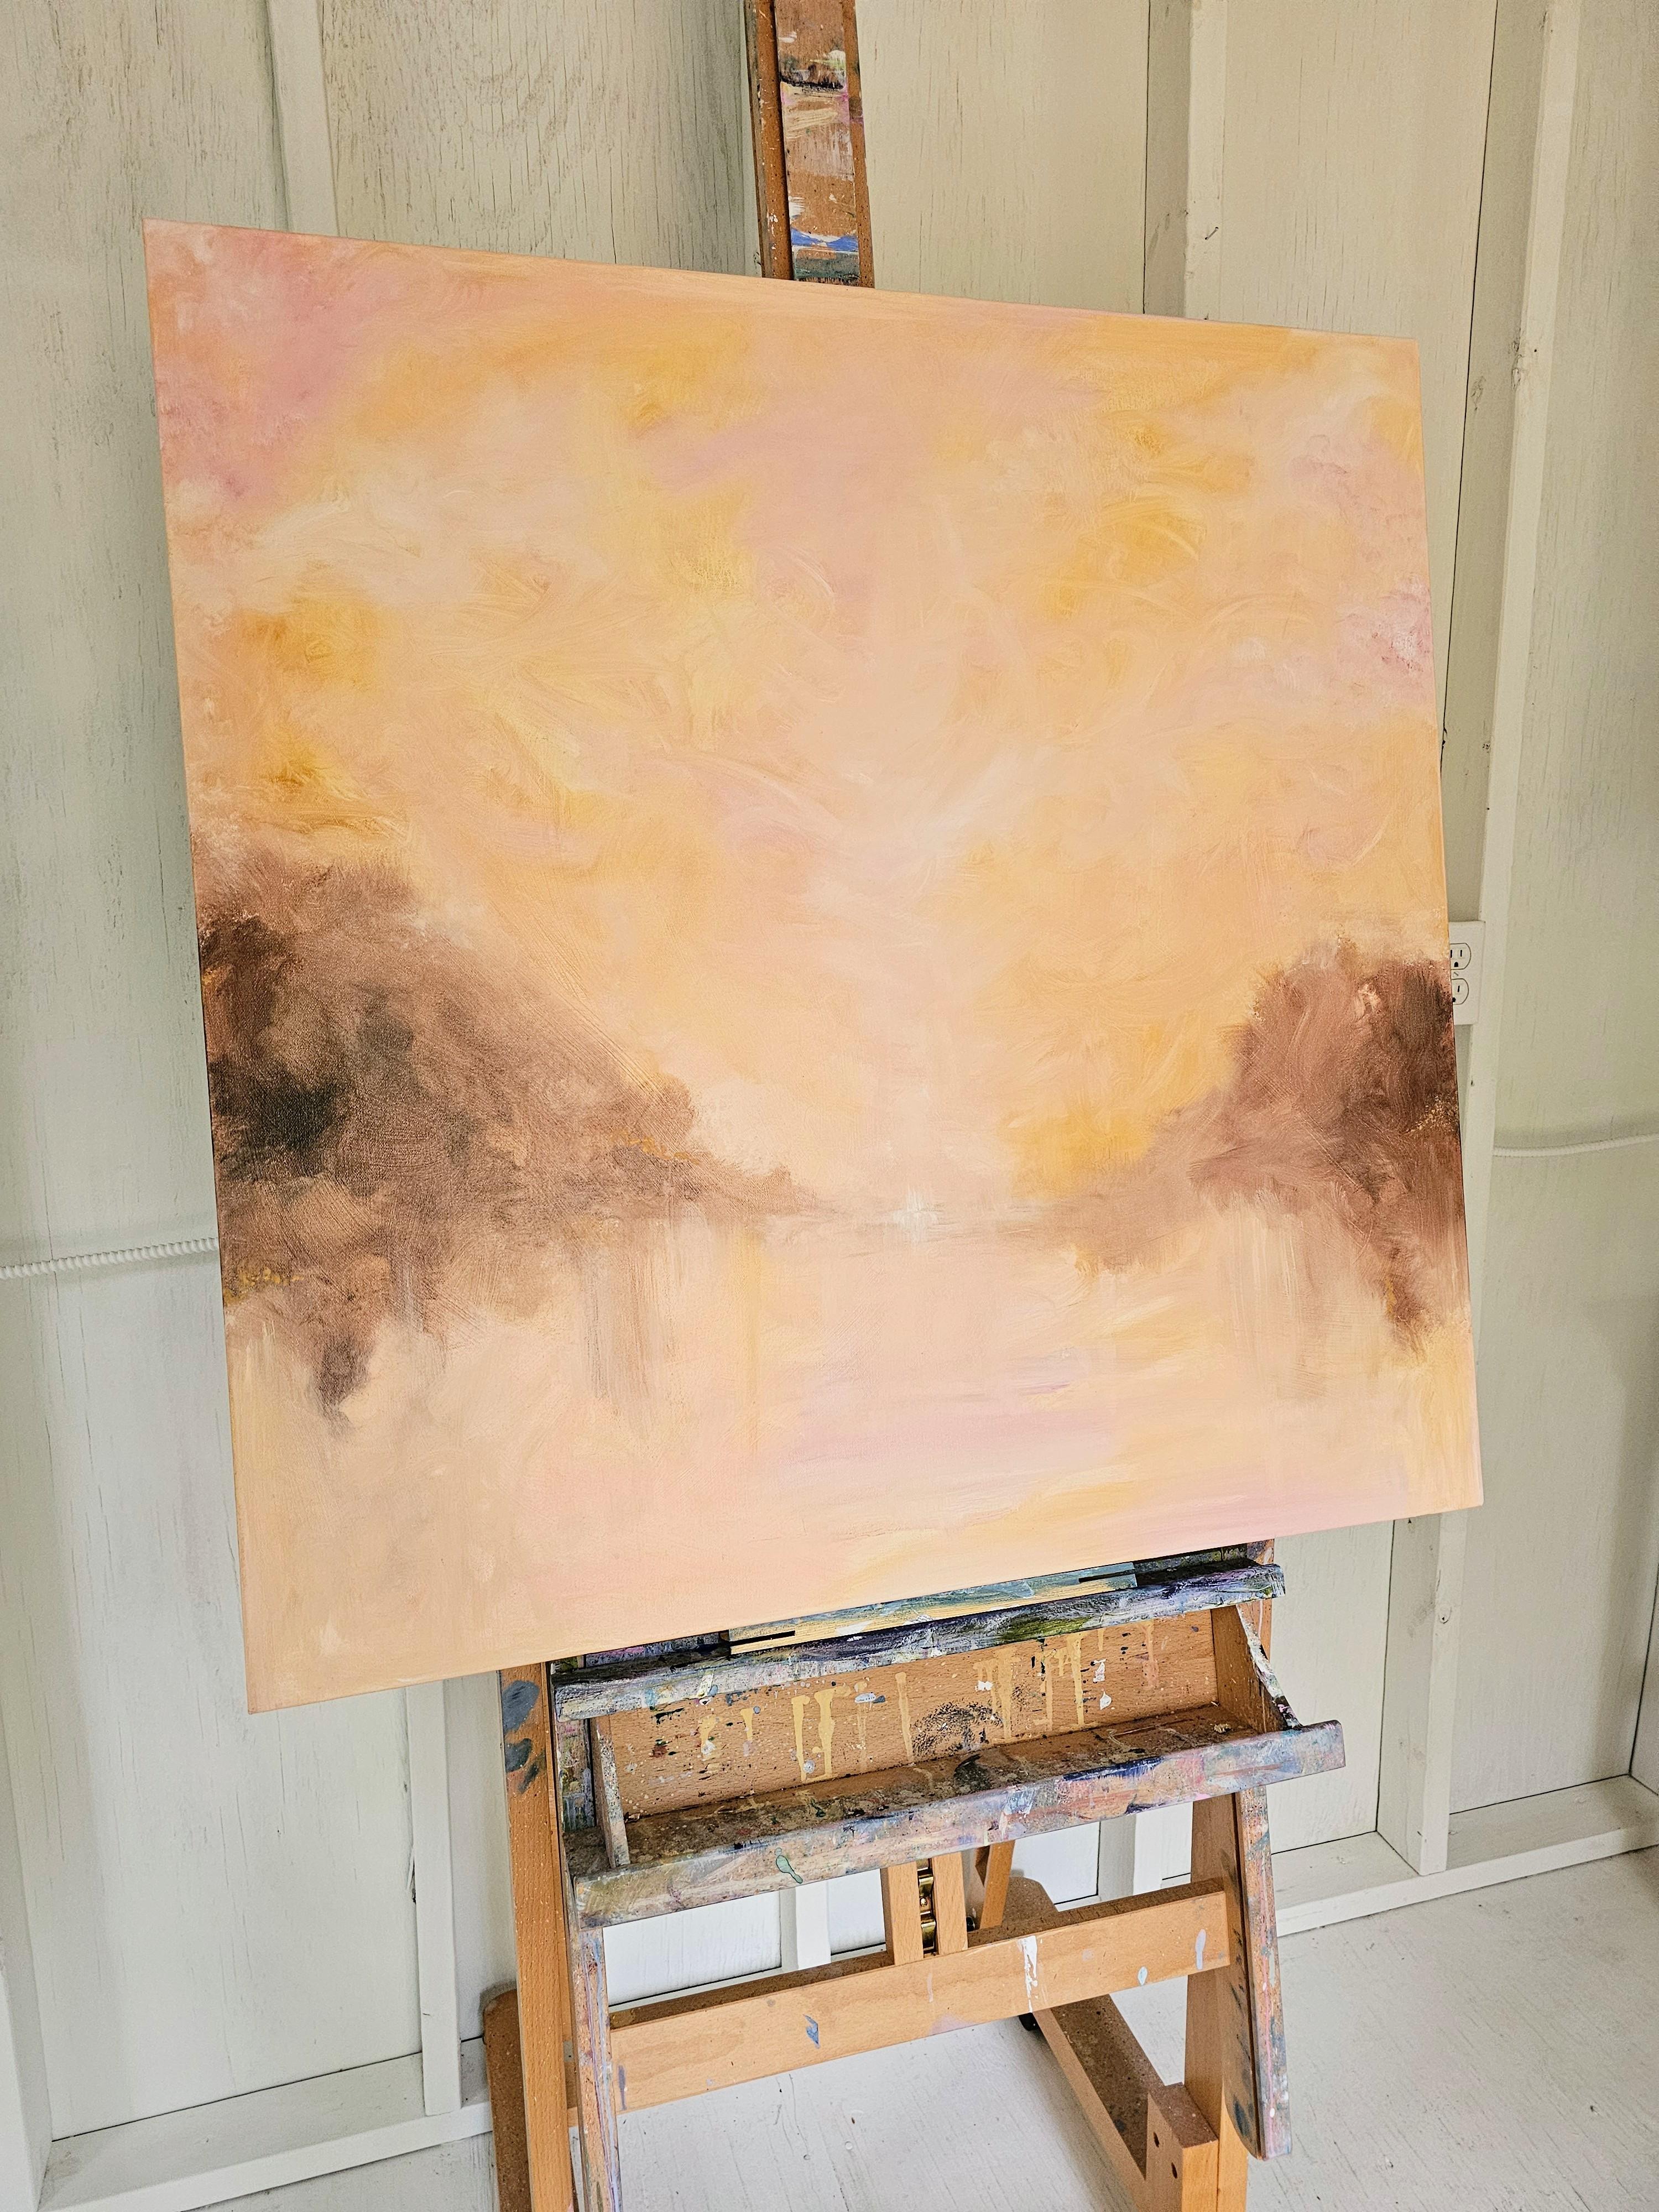 Grand rising - Large peach fuzz color abstract landscape painting For Sale 7